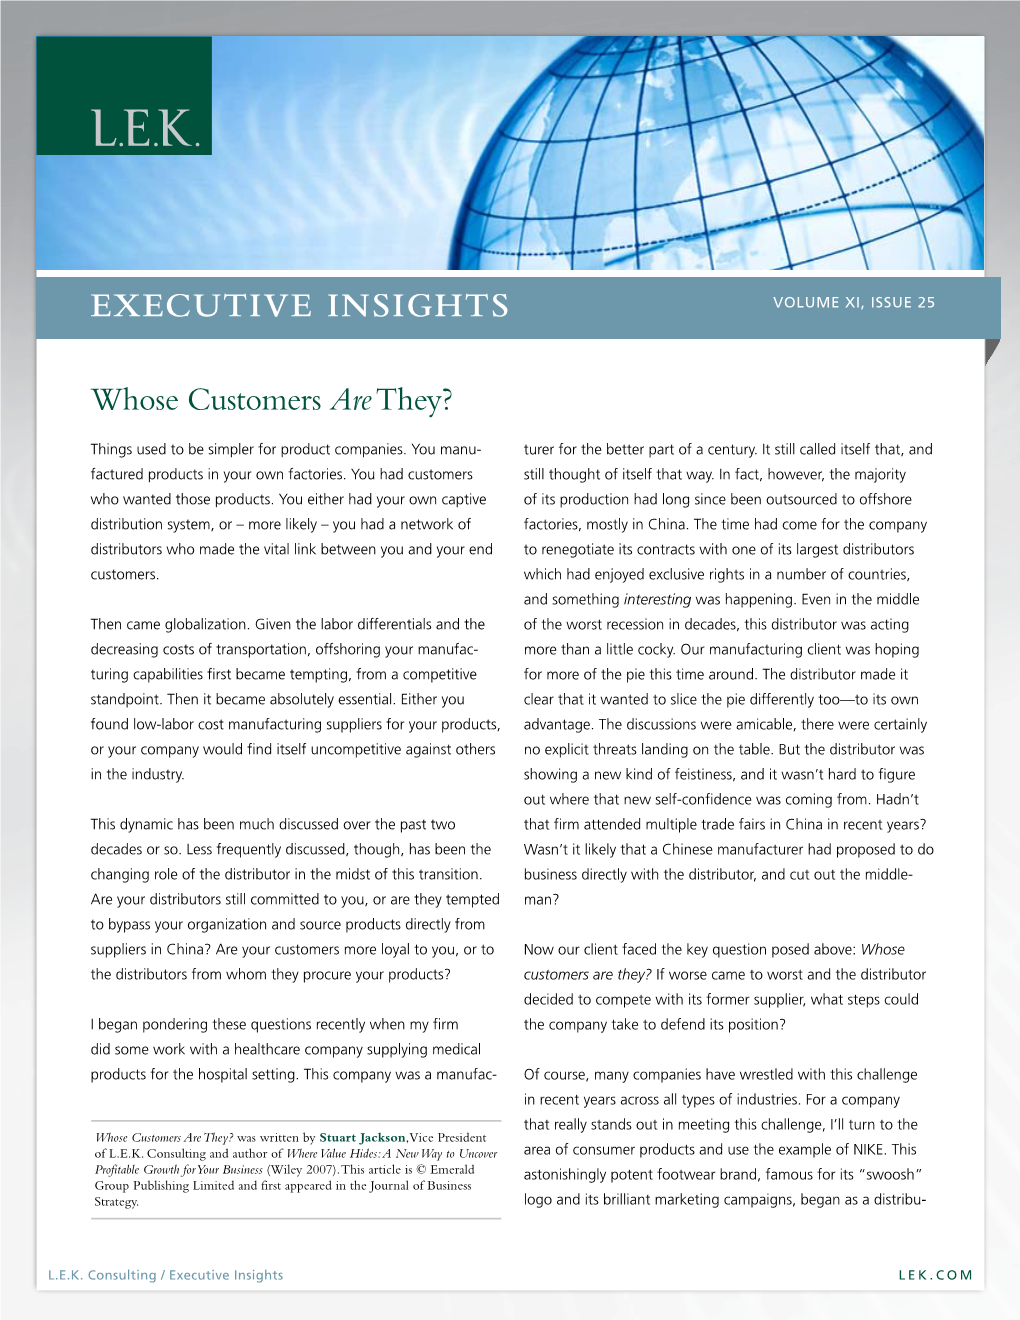 Executive Insights Volume XI, Issue 25